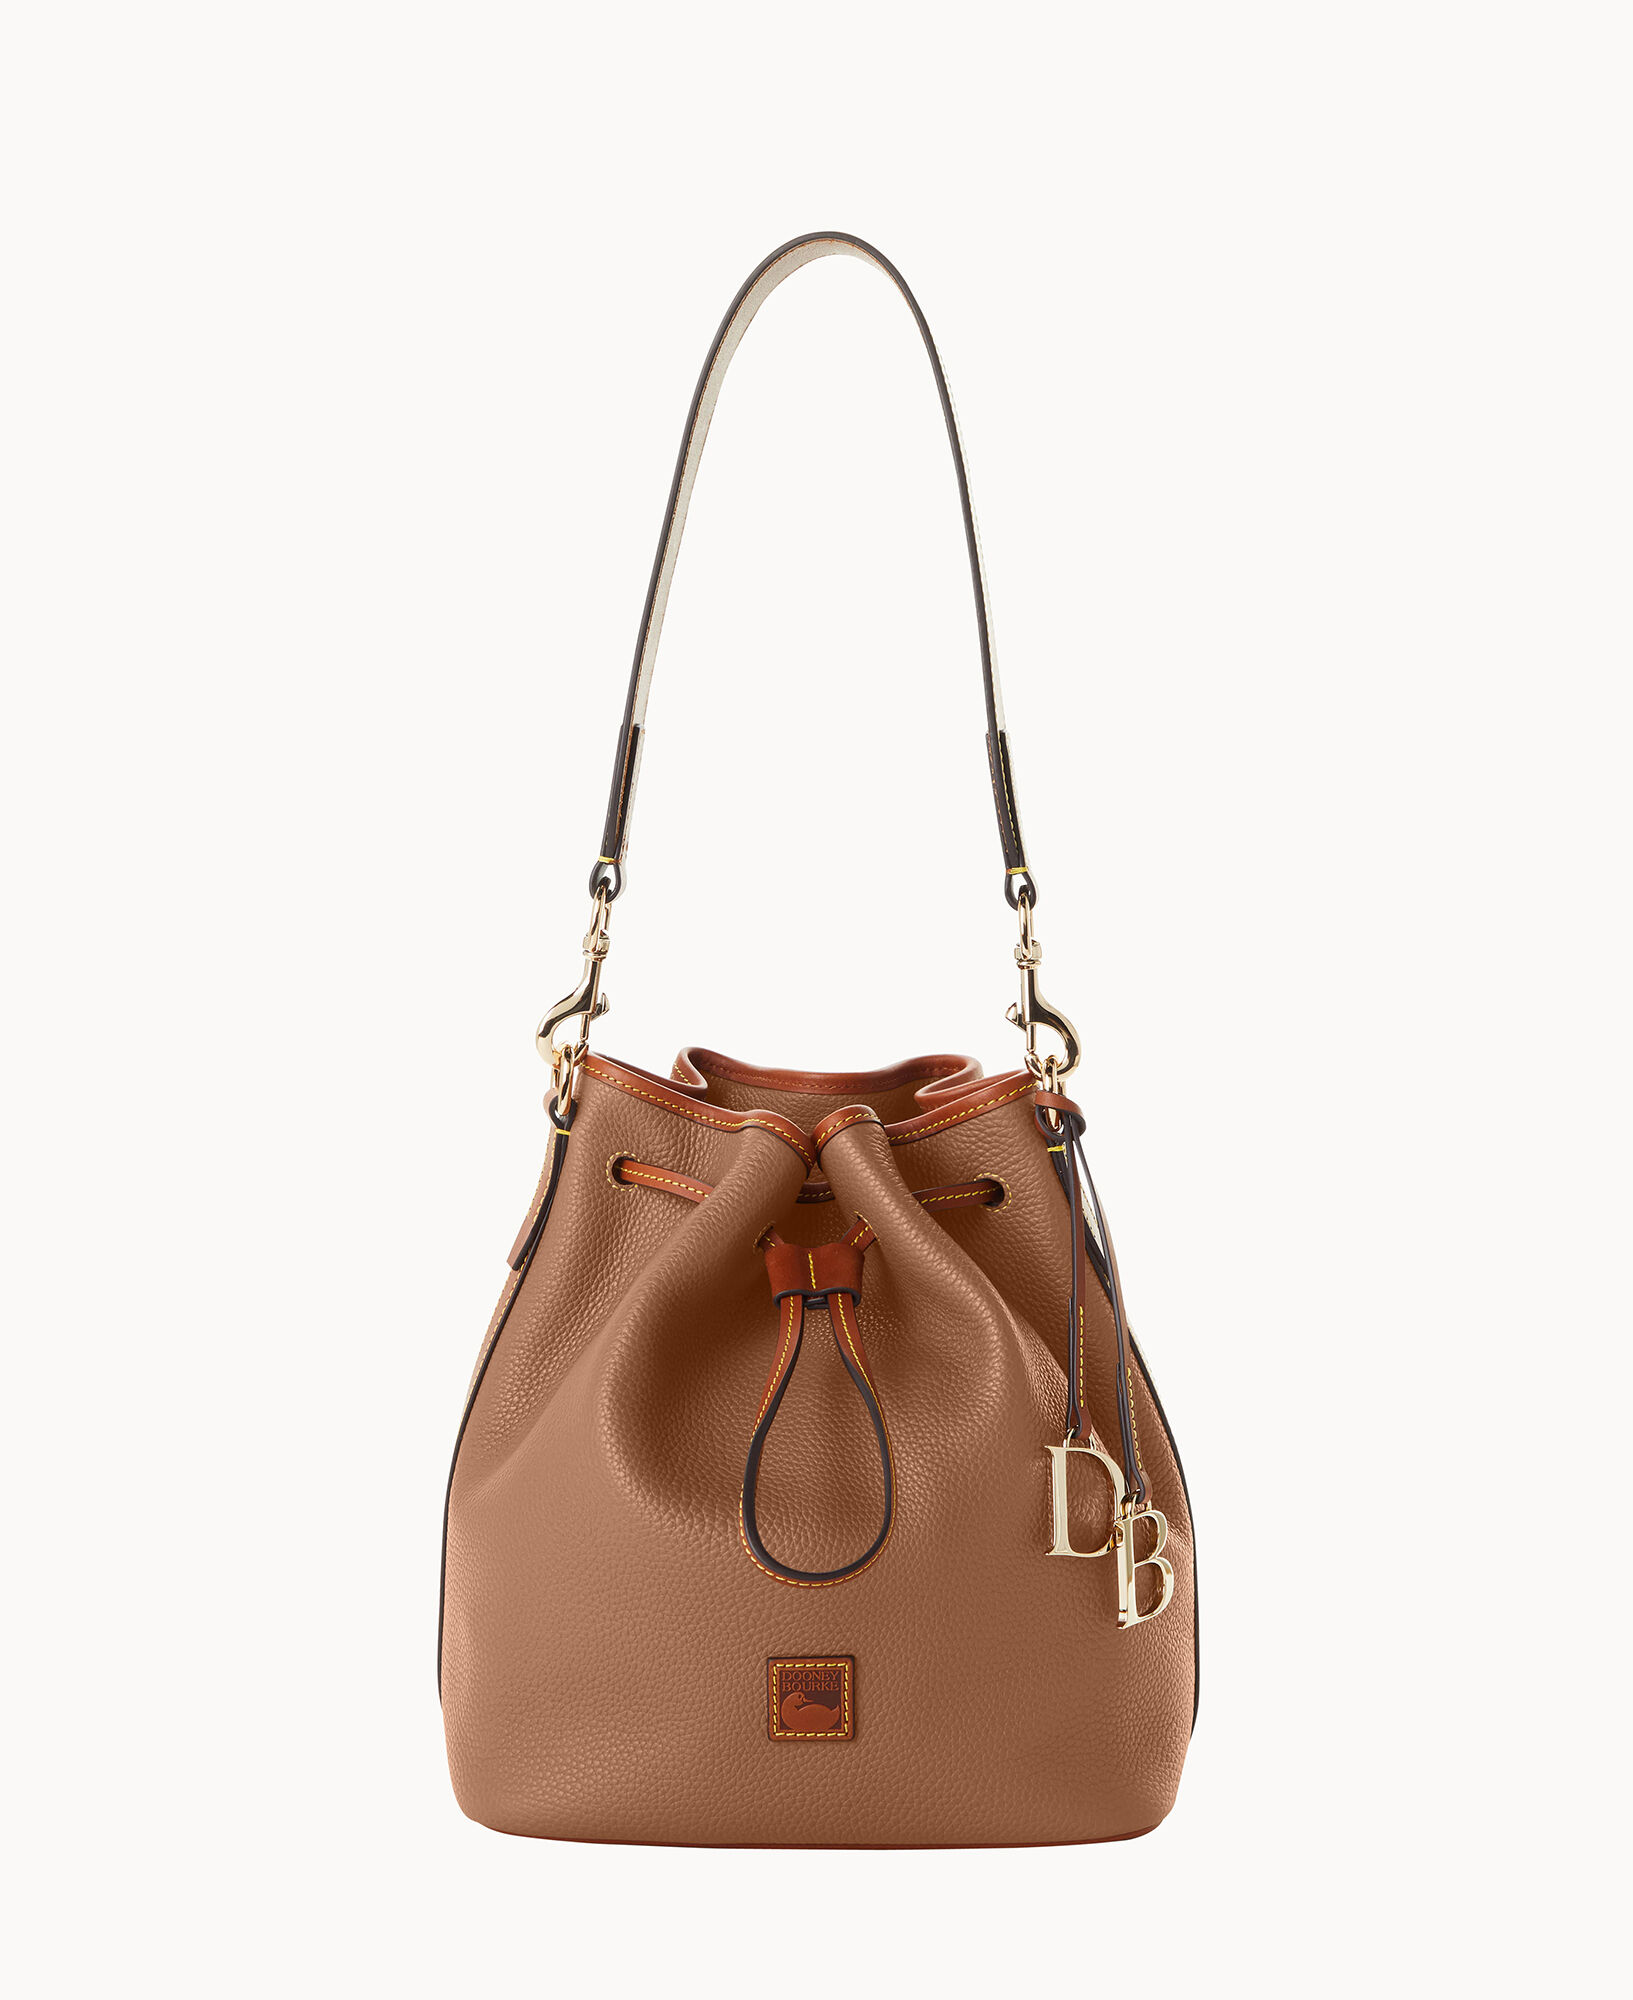 Judgment There is a trend sweater Dooney & Bourke Pebble Grain Drawstring